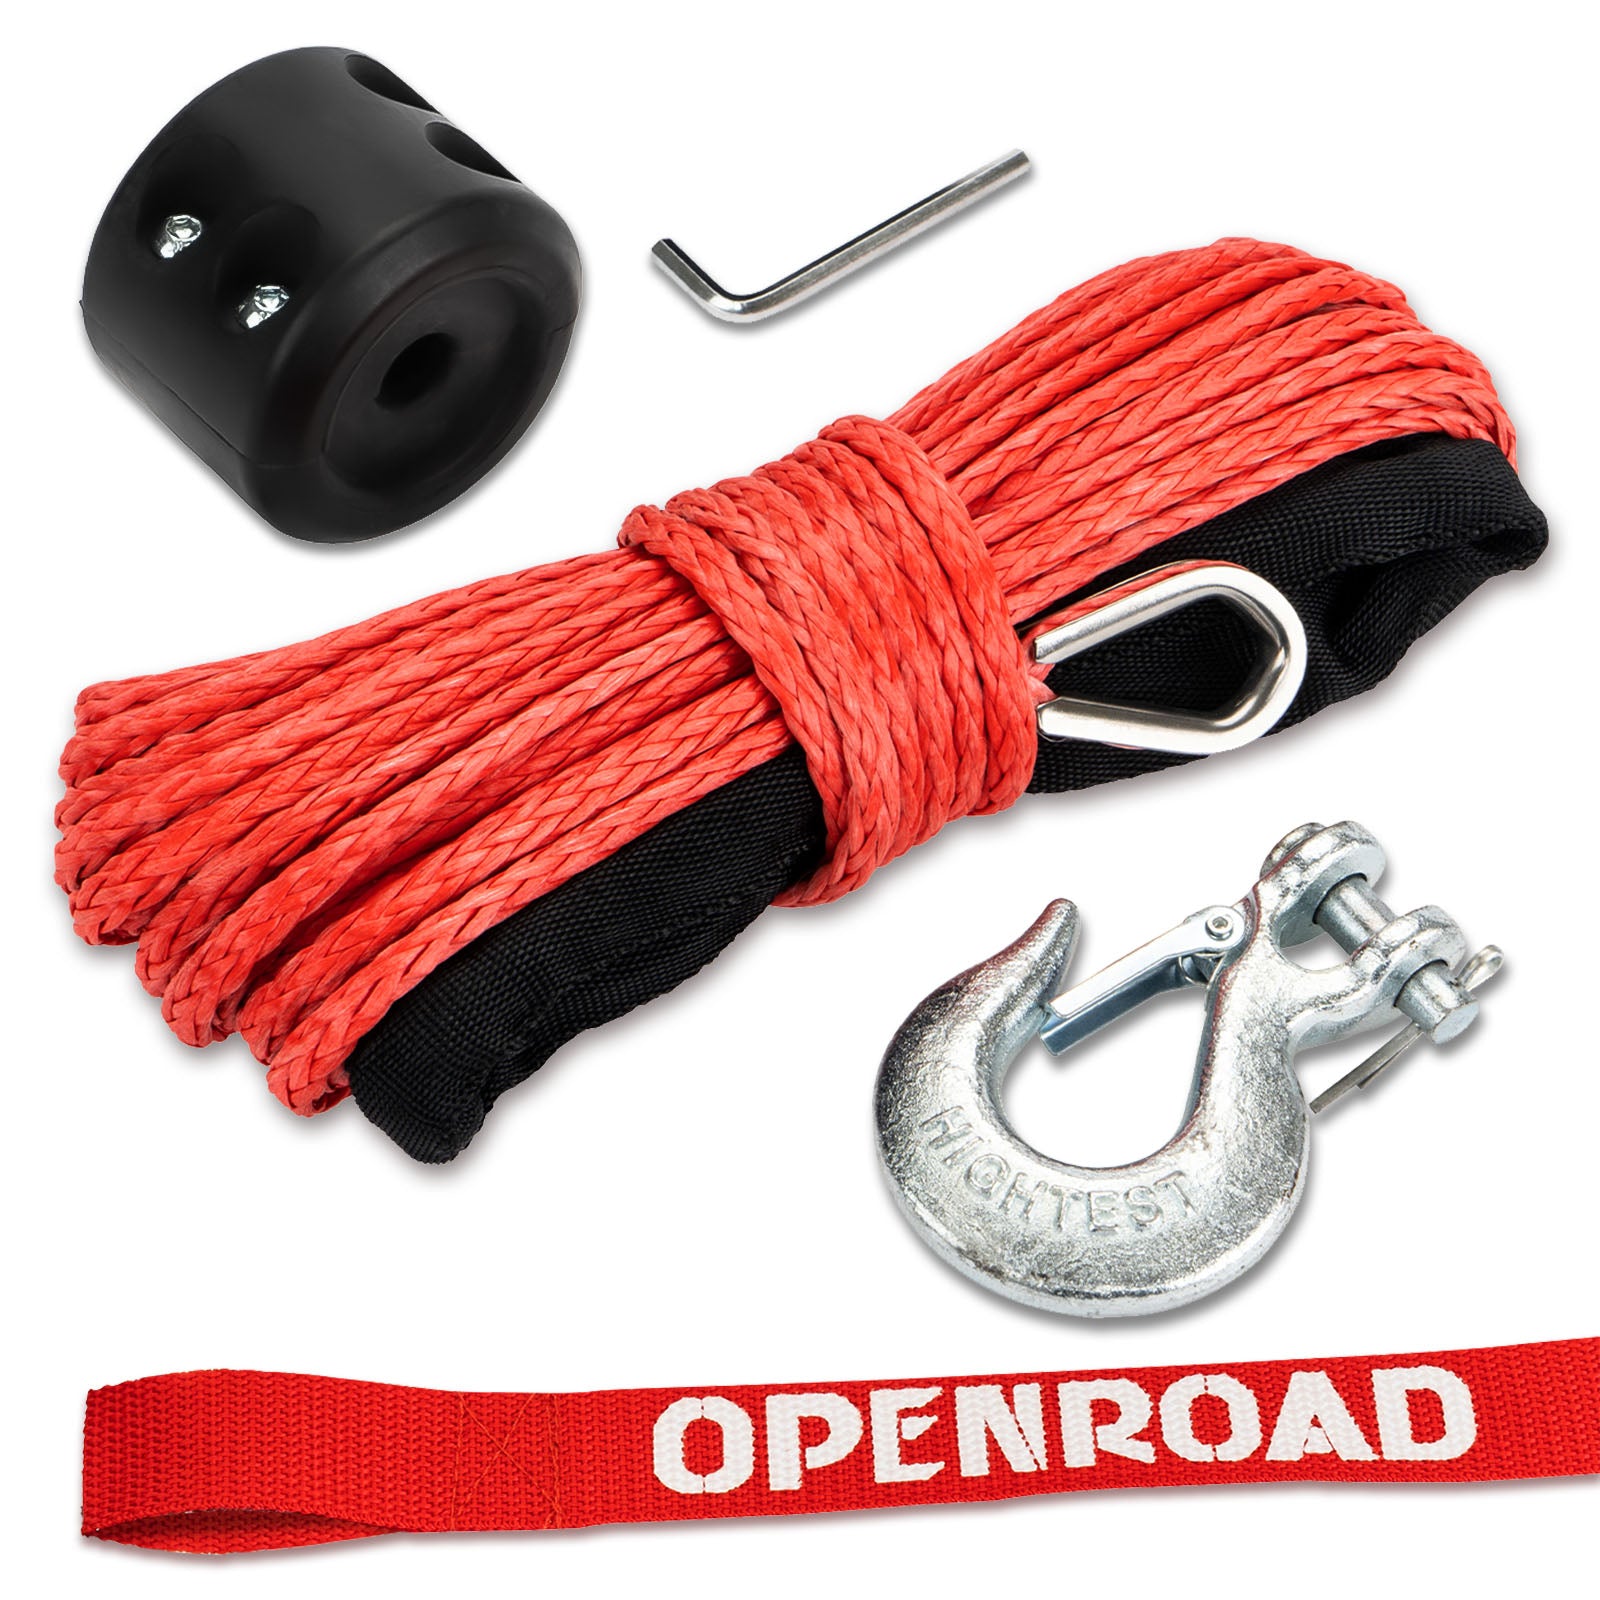 OPENROAD Synthetic Winch Rope 1/4" x 50'Winch Rope Extension with Black Removable Hook and ATV New Adjustable Rubber Blocks  openroad4wd.com Red  